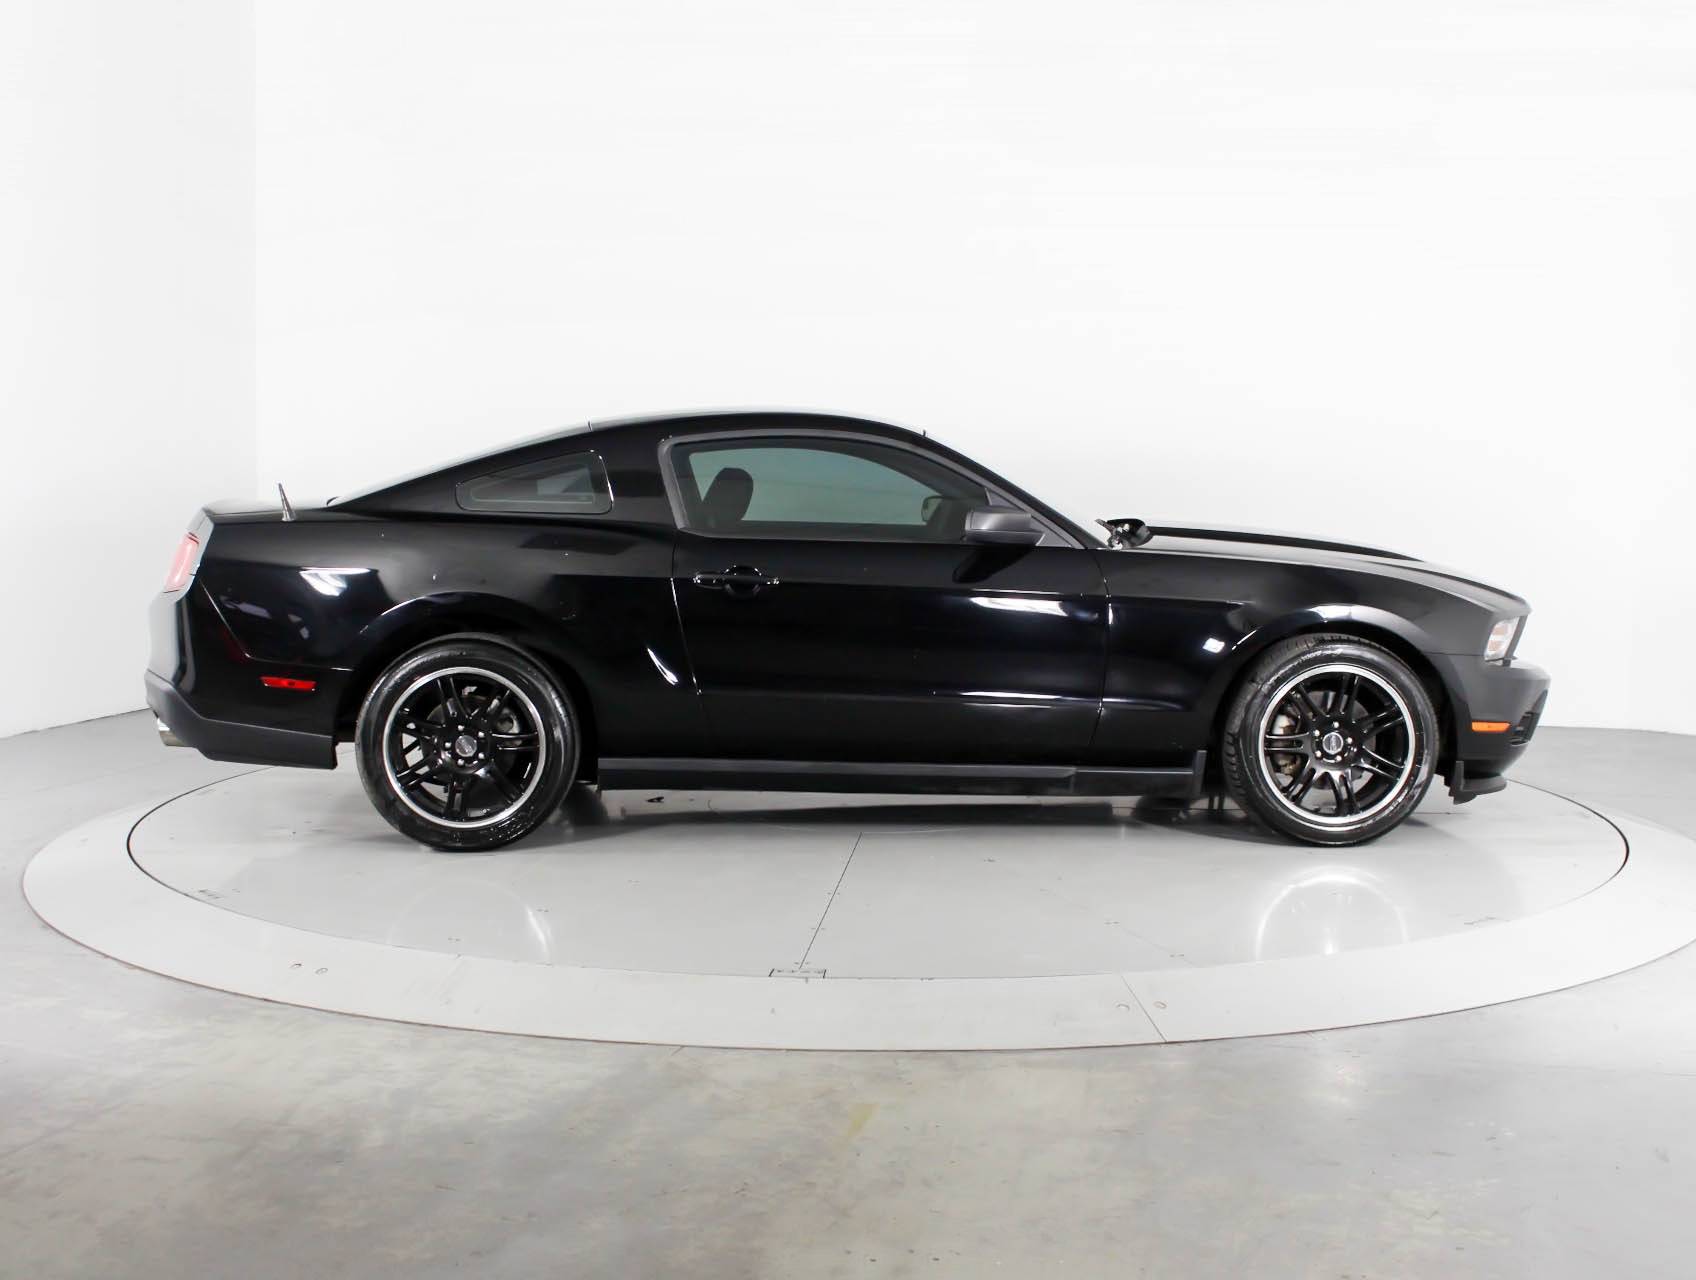 Florida Fine Cars - Used FORD MUSTANG 2012 MIAMI BASE